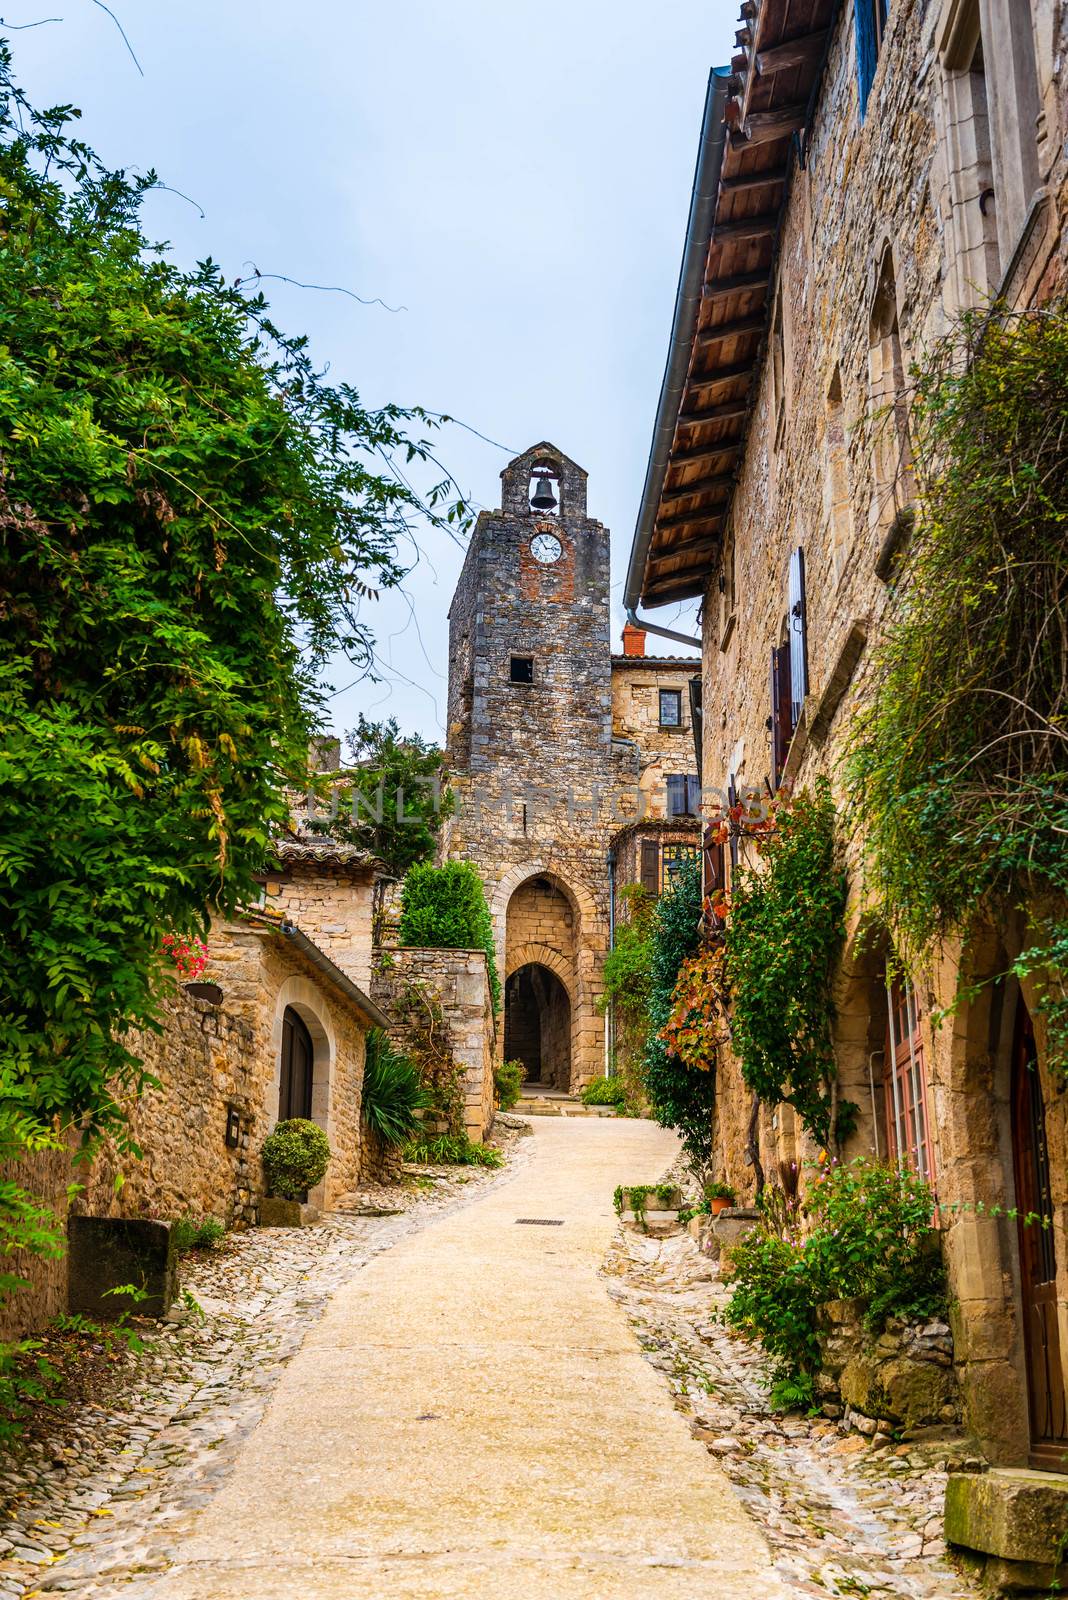 Beautiful medieval village of Bruniquel on the river Aveyron in Occitania, France by Frederic